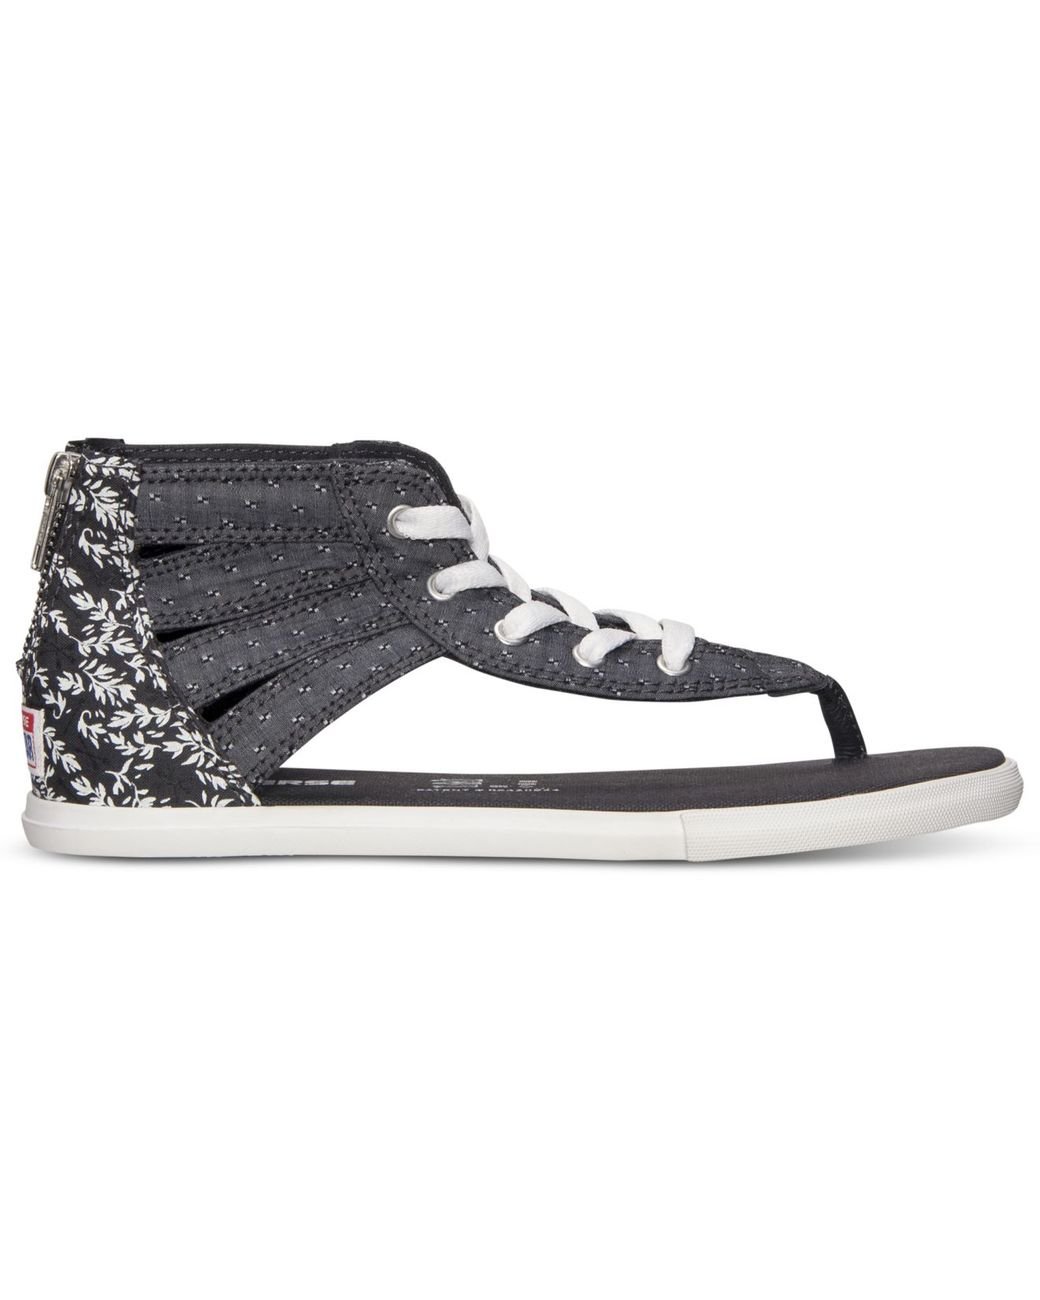 Converse Women'S Chuck Taylor Gladiator Thong Sandals From Finish Line in  Black | Lyst